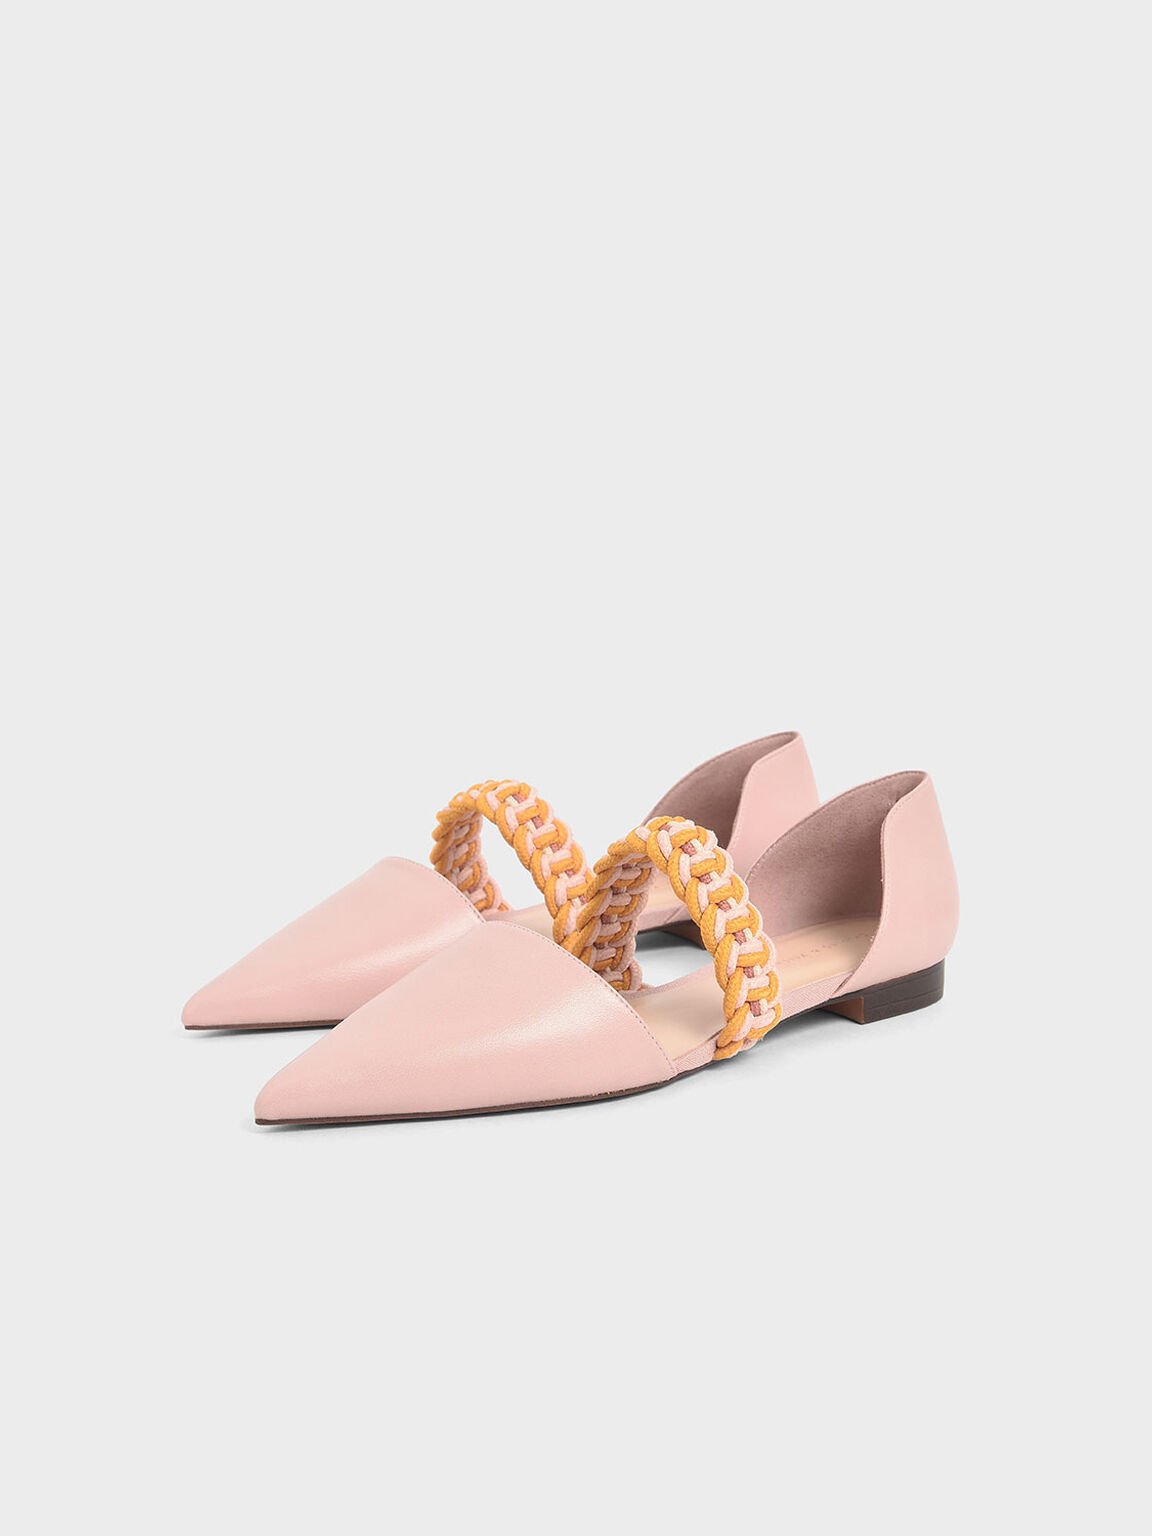 Braided-Strap Mary Jane Flats, Nude, hi-res